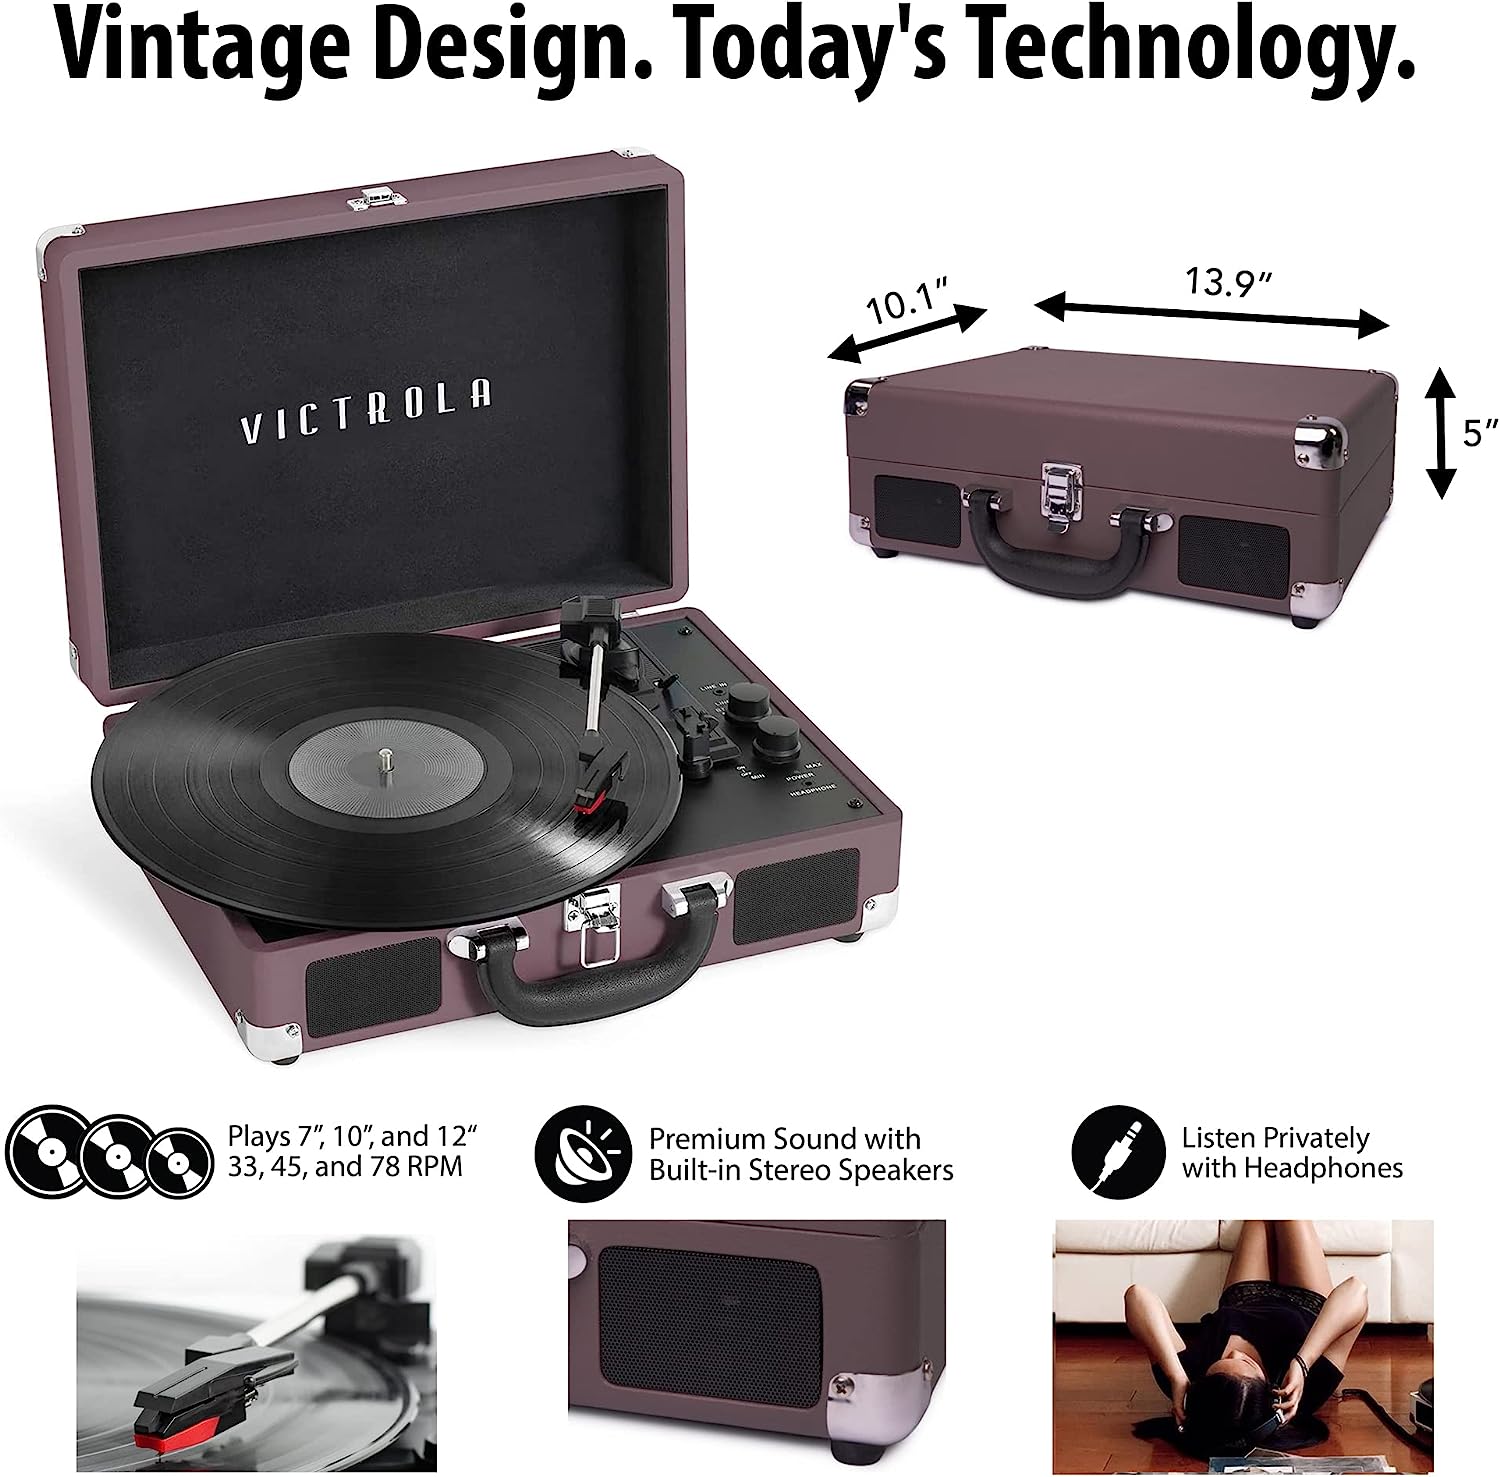 Victrola Vintage 3-Speed Bluetooth Portable Suitcase Account Player with Built-in Speakers | Upgraded Turntable Audio Sound| Includes Extra Stylus | Black, Prototype Number: VSC-550BT-BK, 1SFA